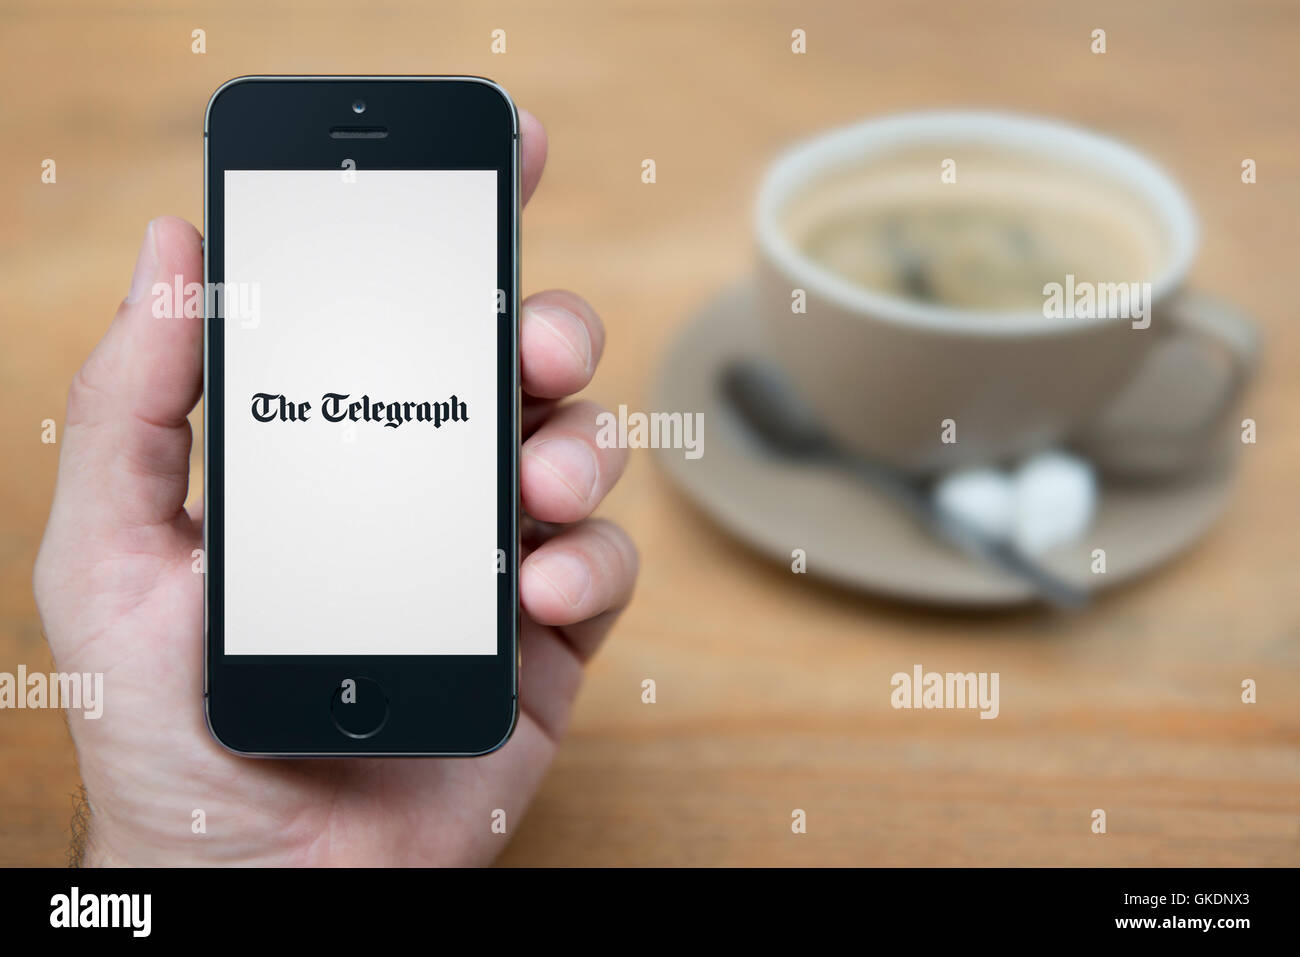 A man looks at his iPhone which displays the Telegraph logo, while sat with a cup of coffee (Editorial use only). Stock Photo